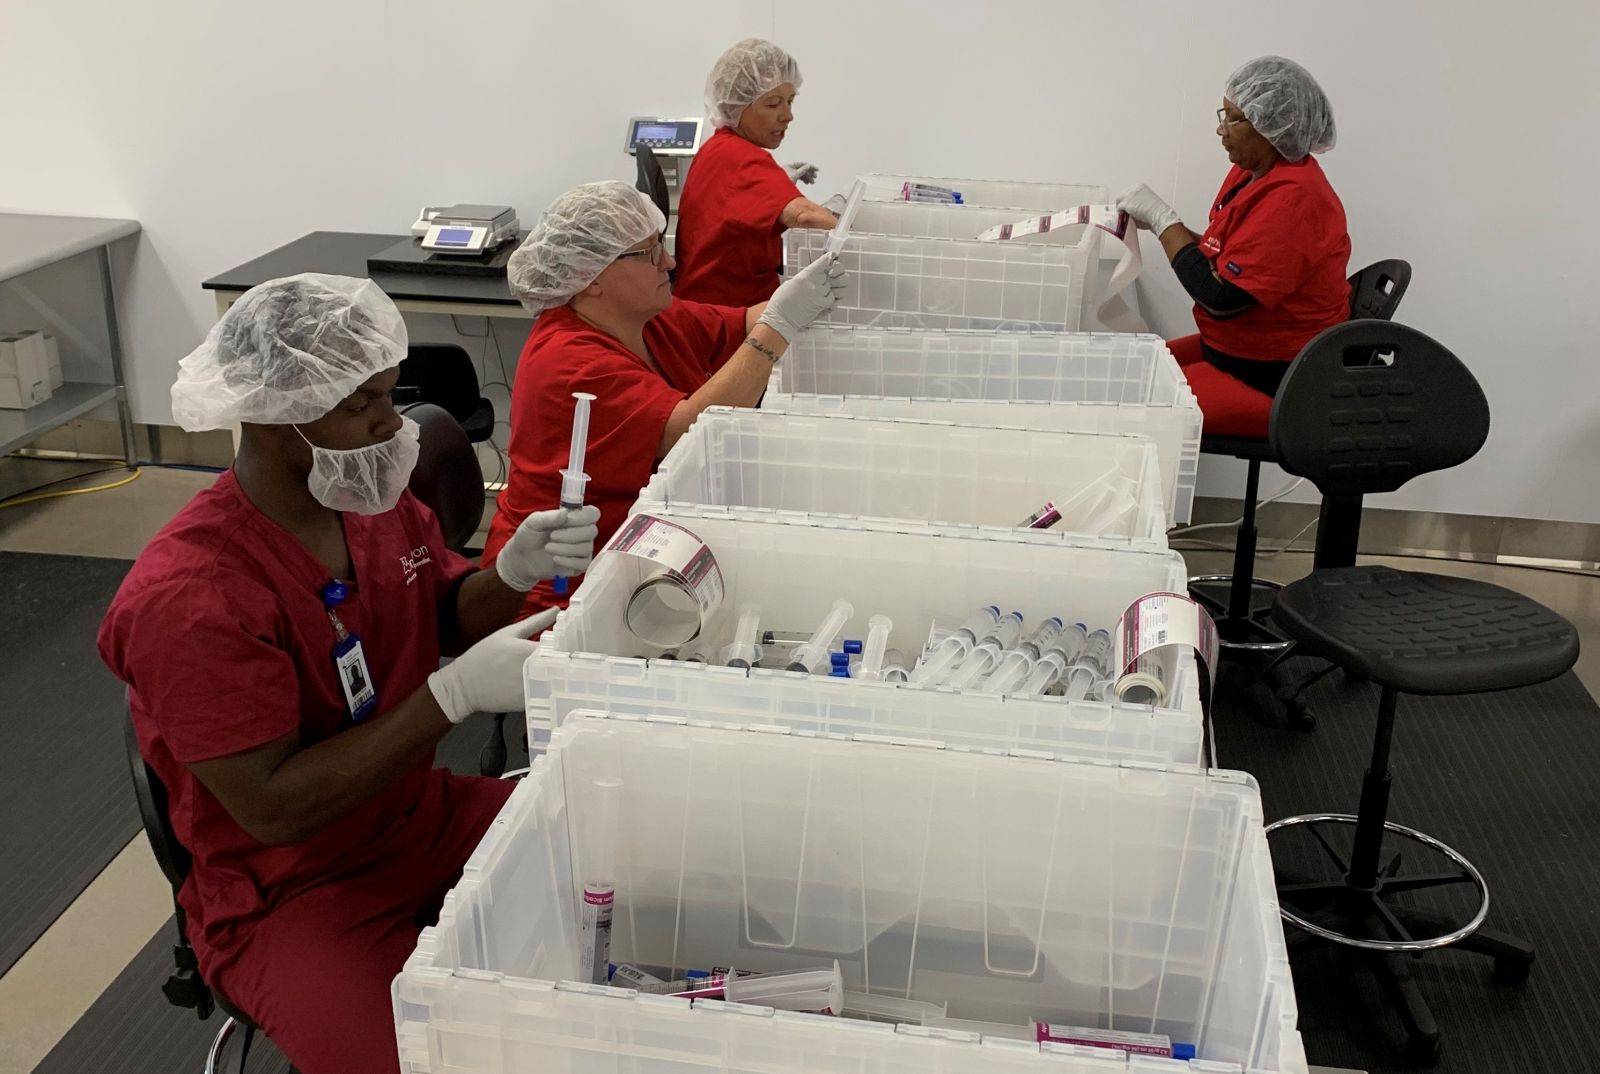 Nephron Pharmaceuticals began a program last month which allows educators to make extra money and work around their classroom schedules. (Photo/Provided)